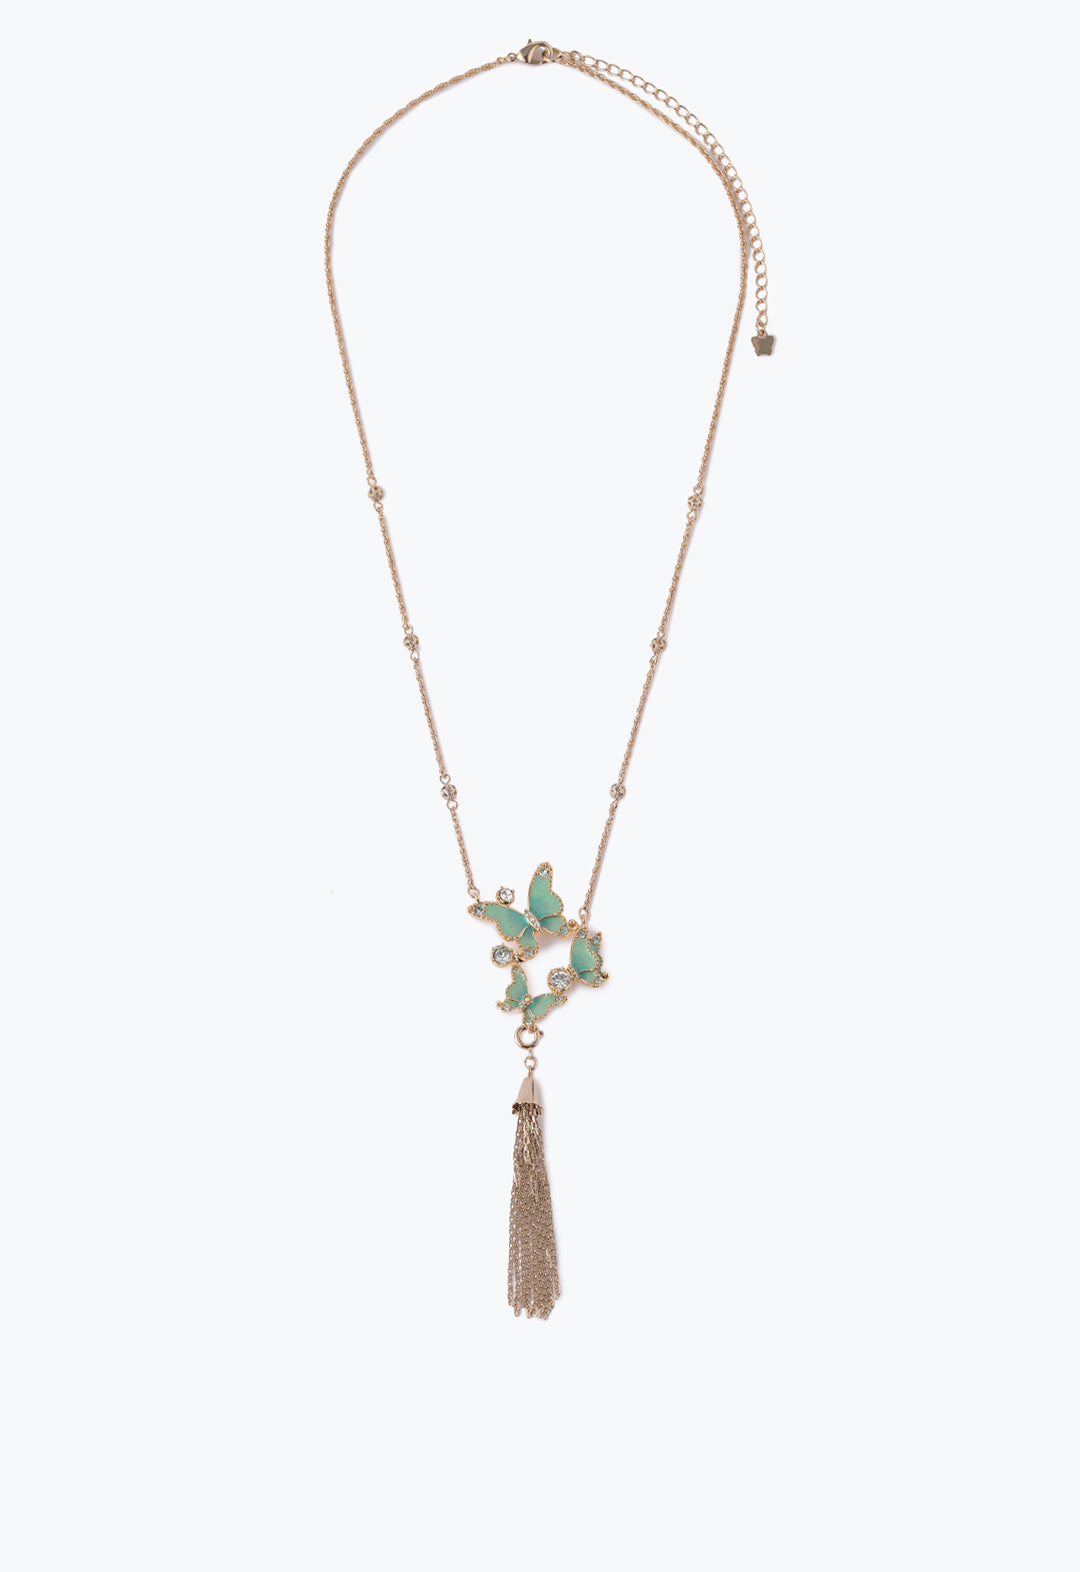 Butterfly Trio Statement Necklace green, golden chain with small links, a pendant as tieback-like